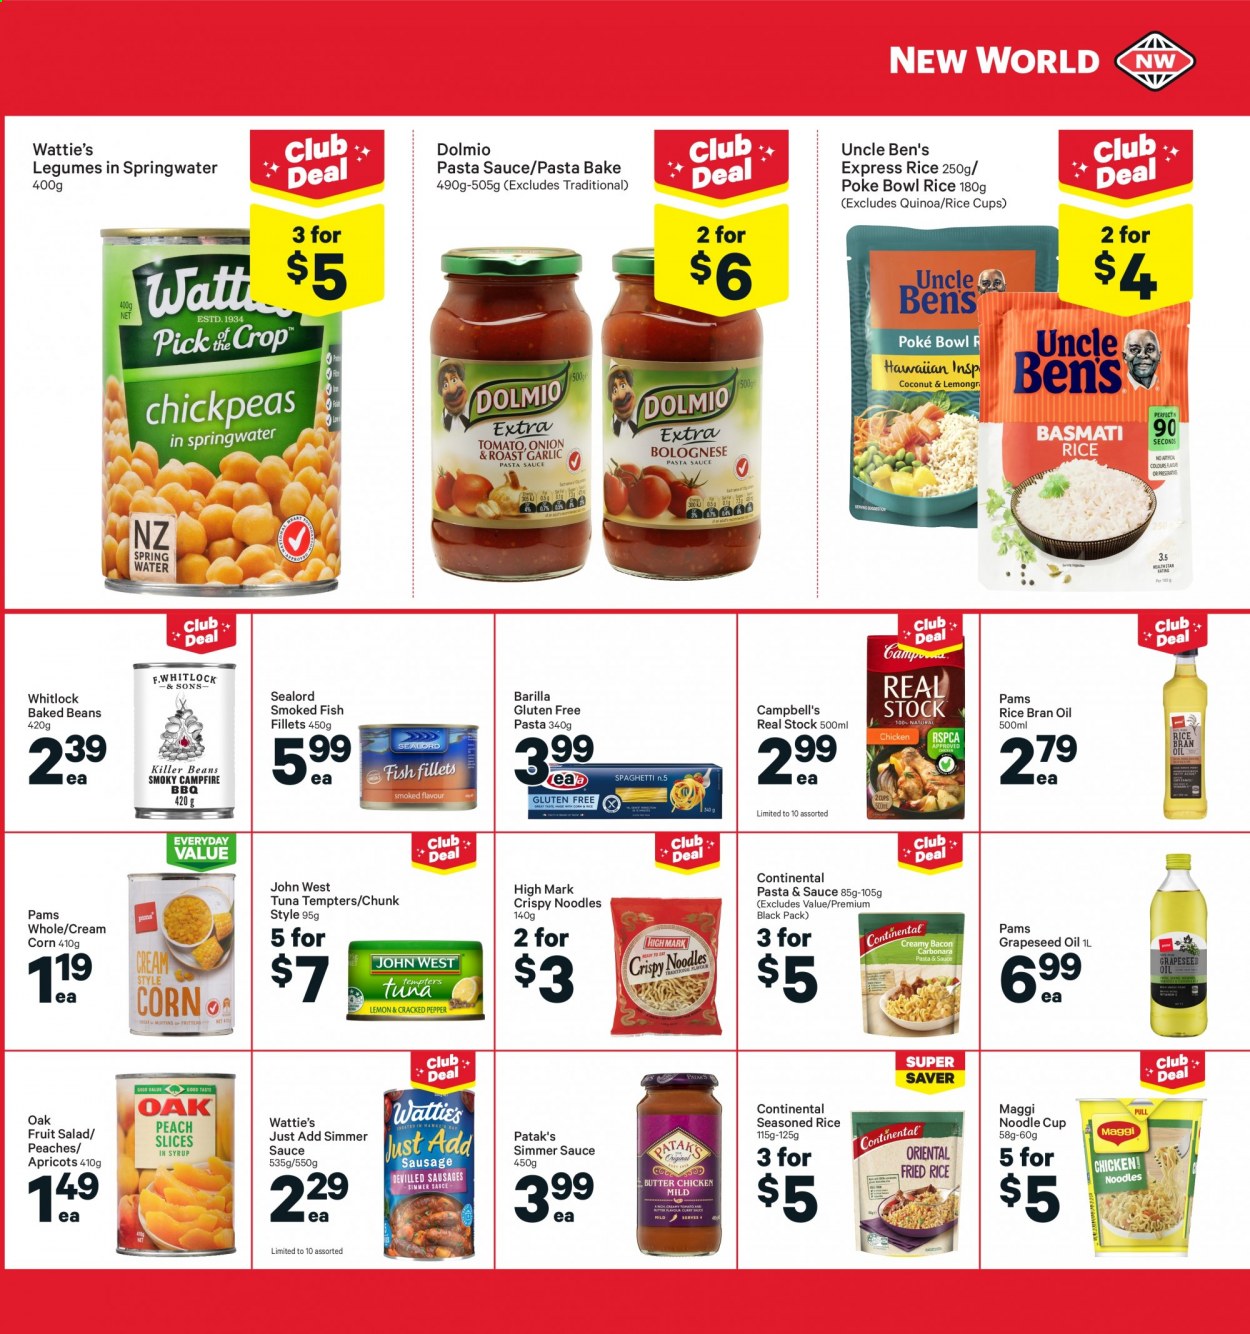 thumbnail - New World mailer - 28.06.2021 - 04.07.2021 - Sales products - beans, corn, salad, apricots, peaches, fish fillets, tuna, fish, Sealord, Campbell's, pasta sauce, Barilla, noodles, Wattie's, Continental, Maggi, baked beans, Uncle Ben's, fruit salad, quinoa, oil, grape seed oil, rais oil. Page 23.